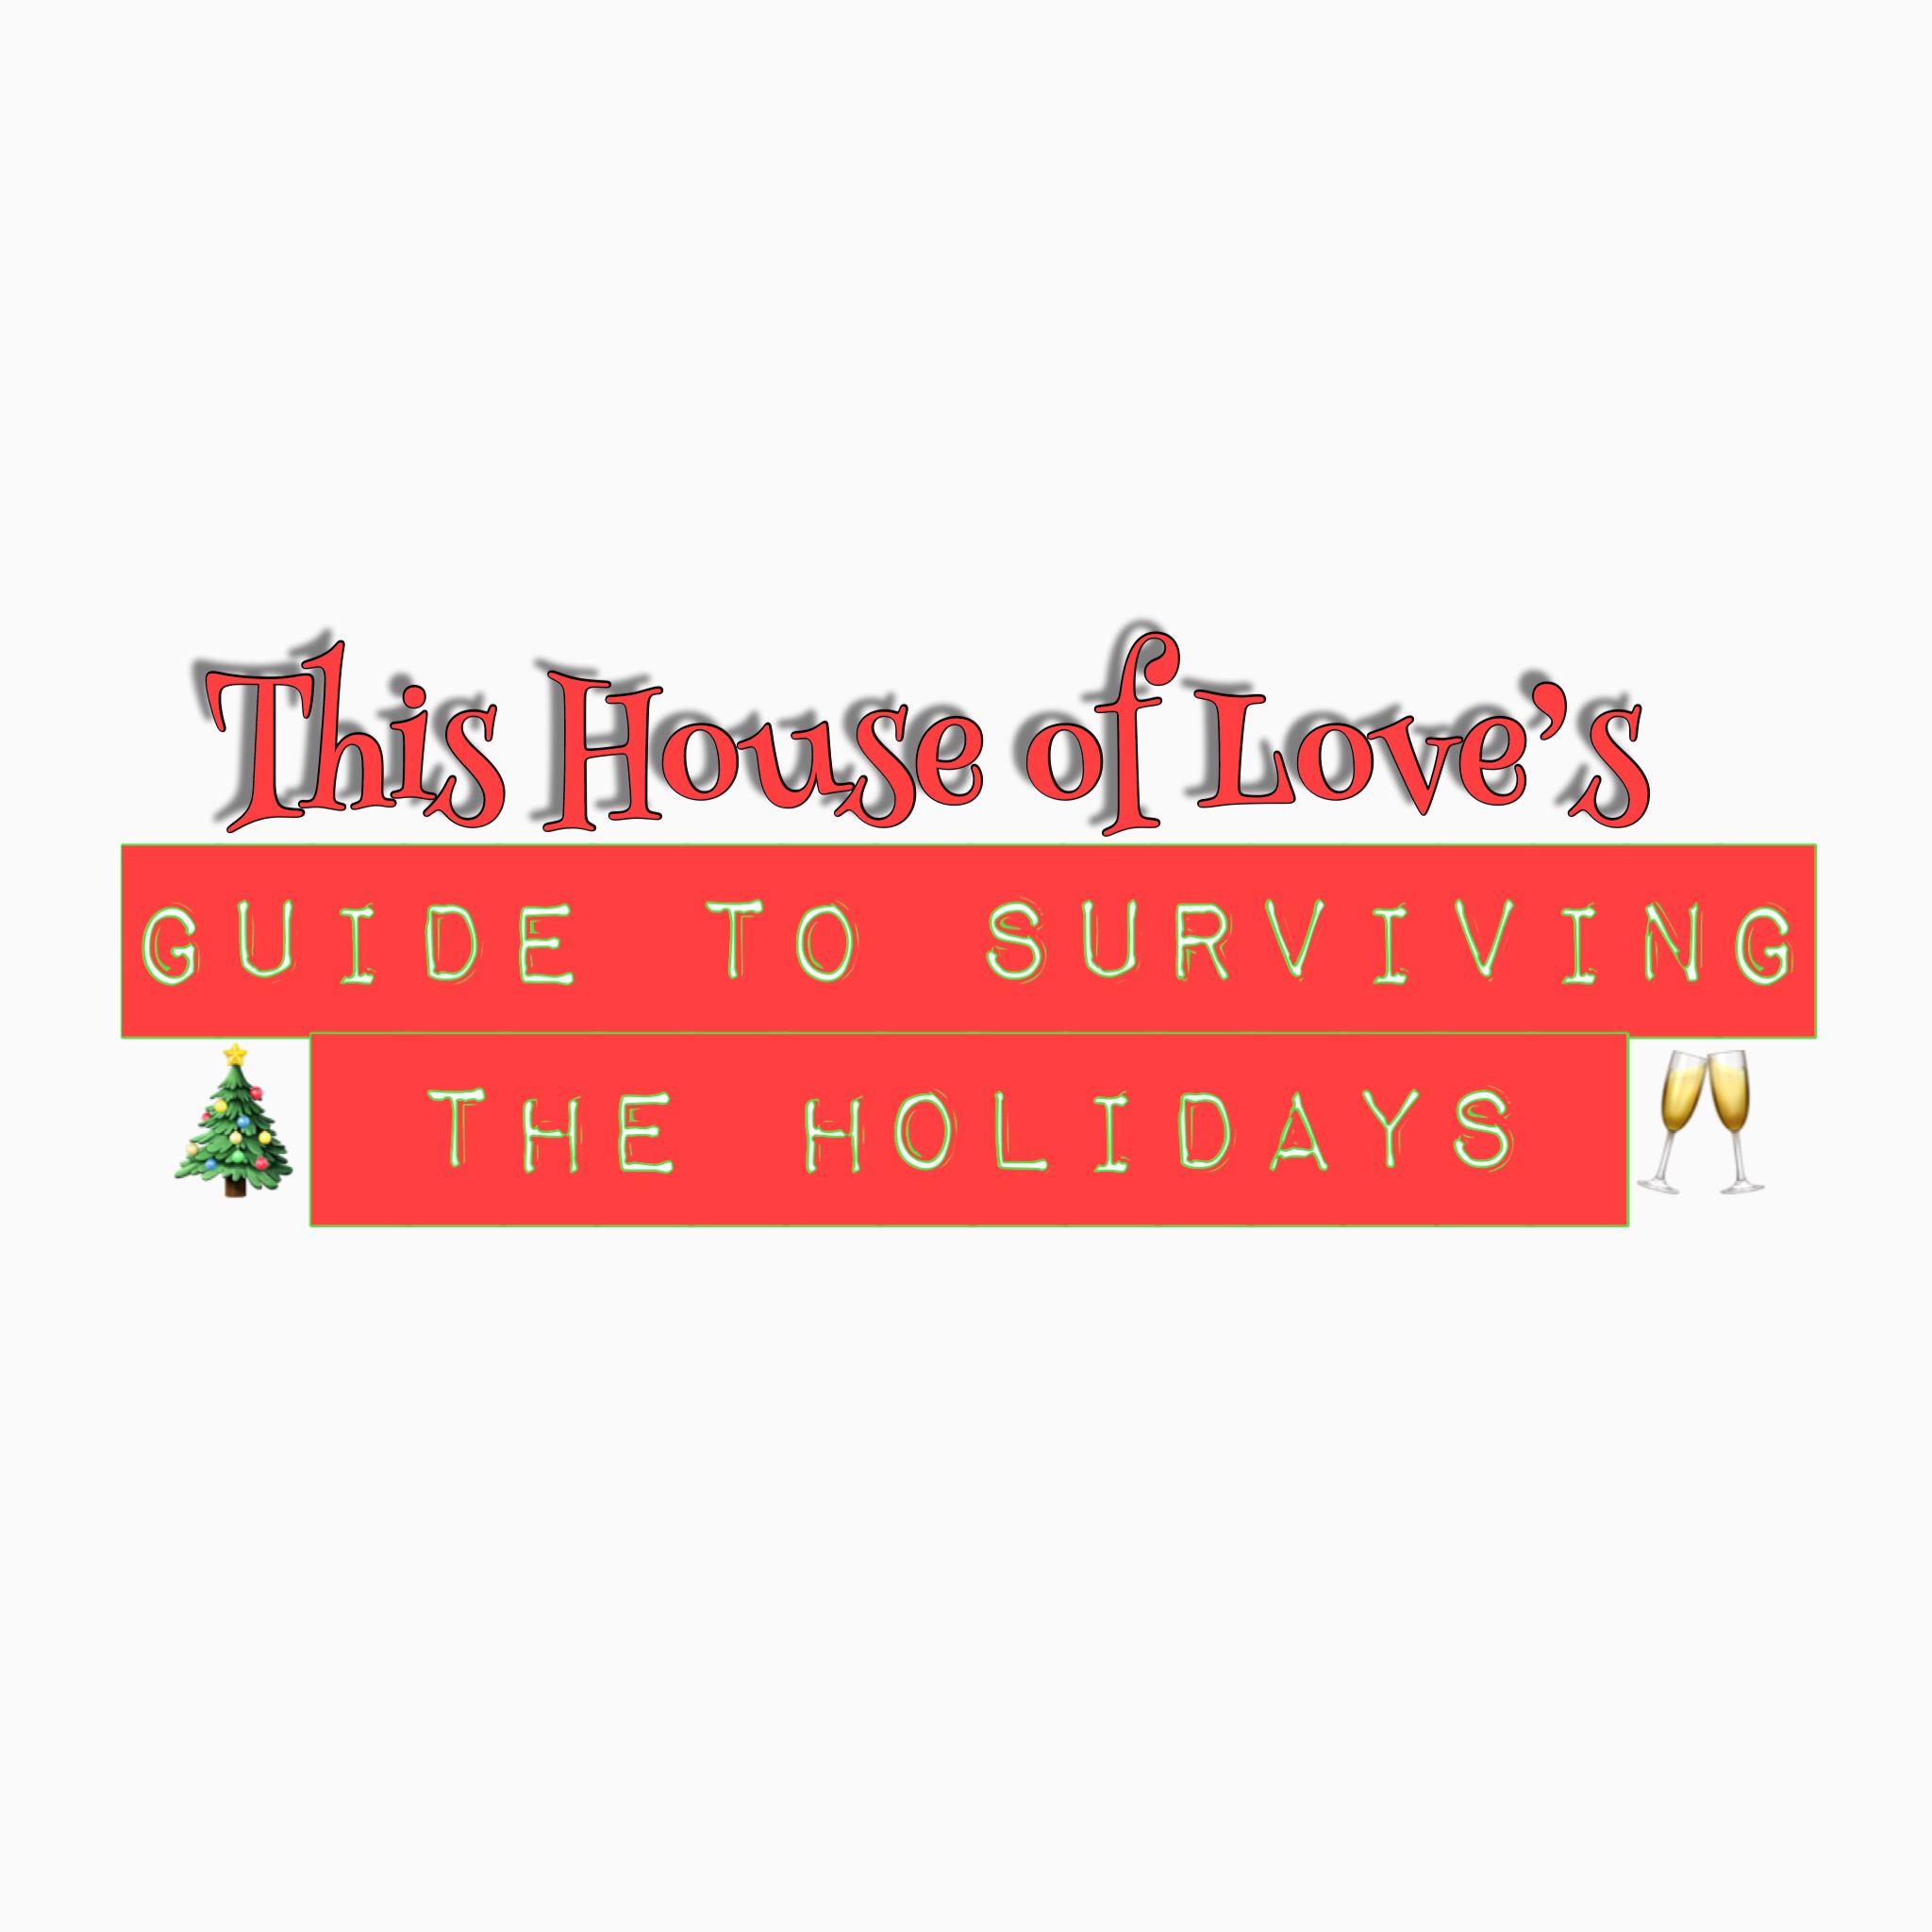 A Simplistic Holiday Survival Guide